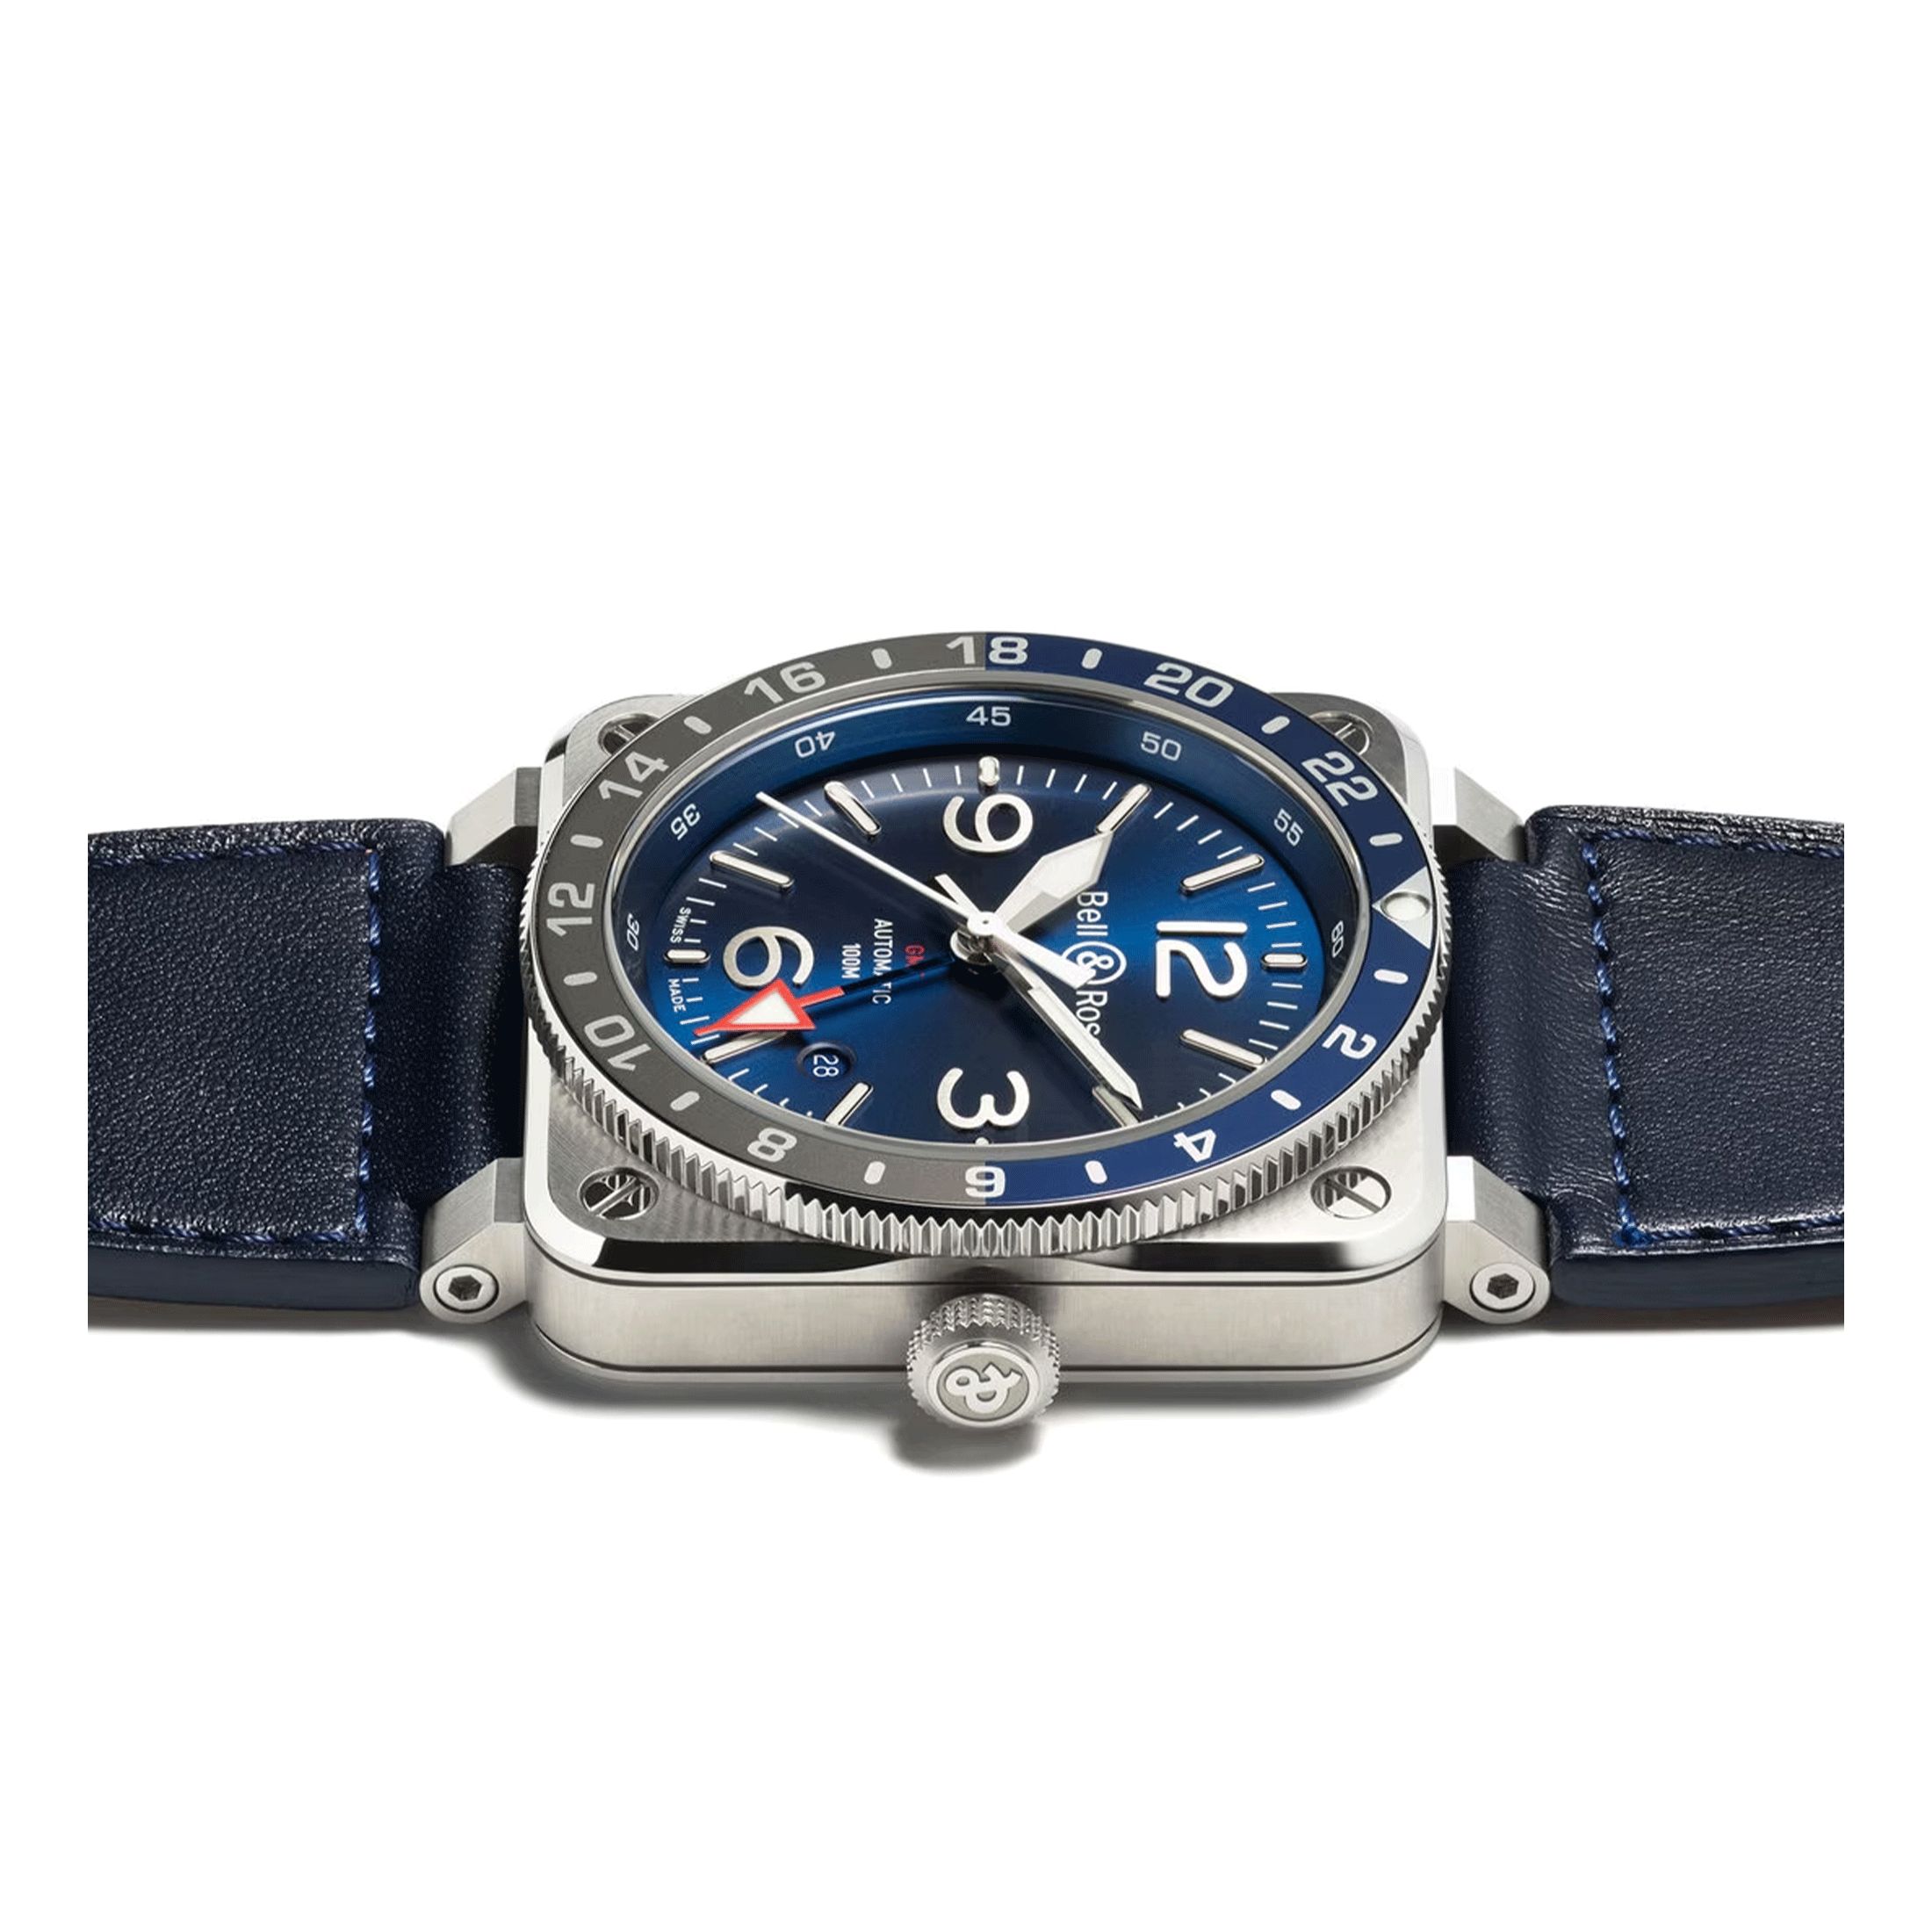 Bell & Ross BR 03-93 GMT Blue automatic blue dial leather strap 42 mm